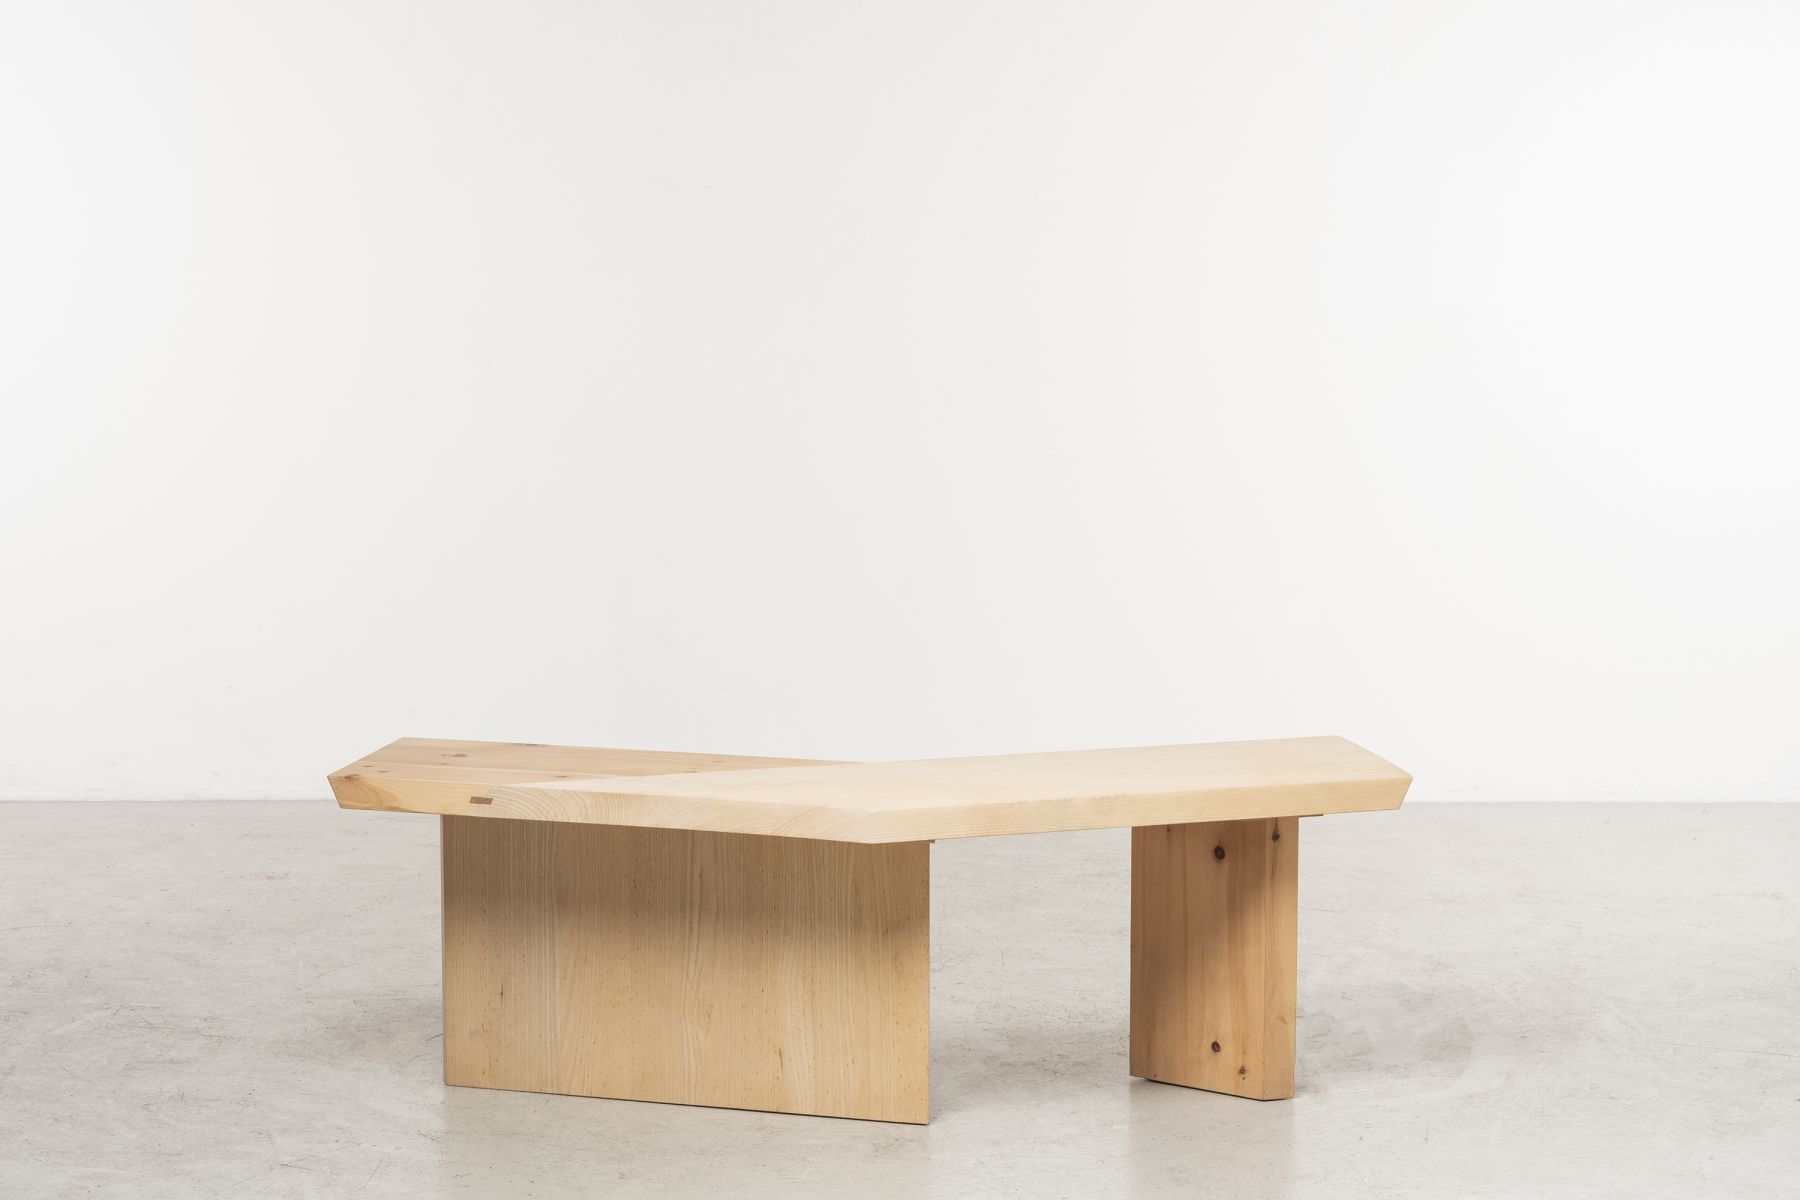 Triennale collection low table Martino Gamper pic-4